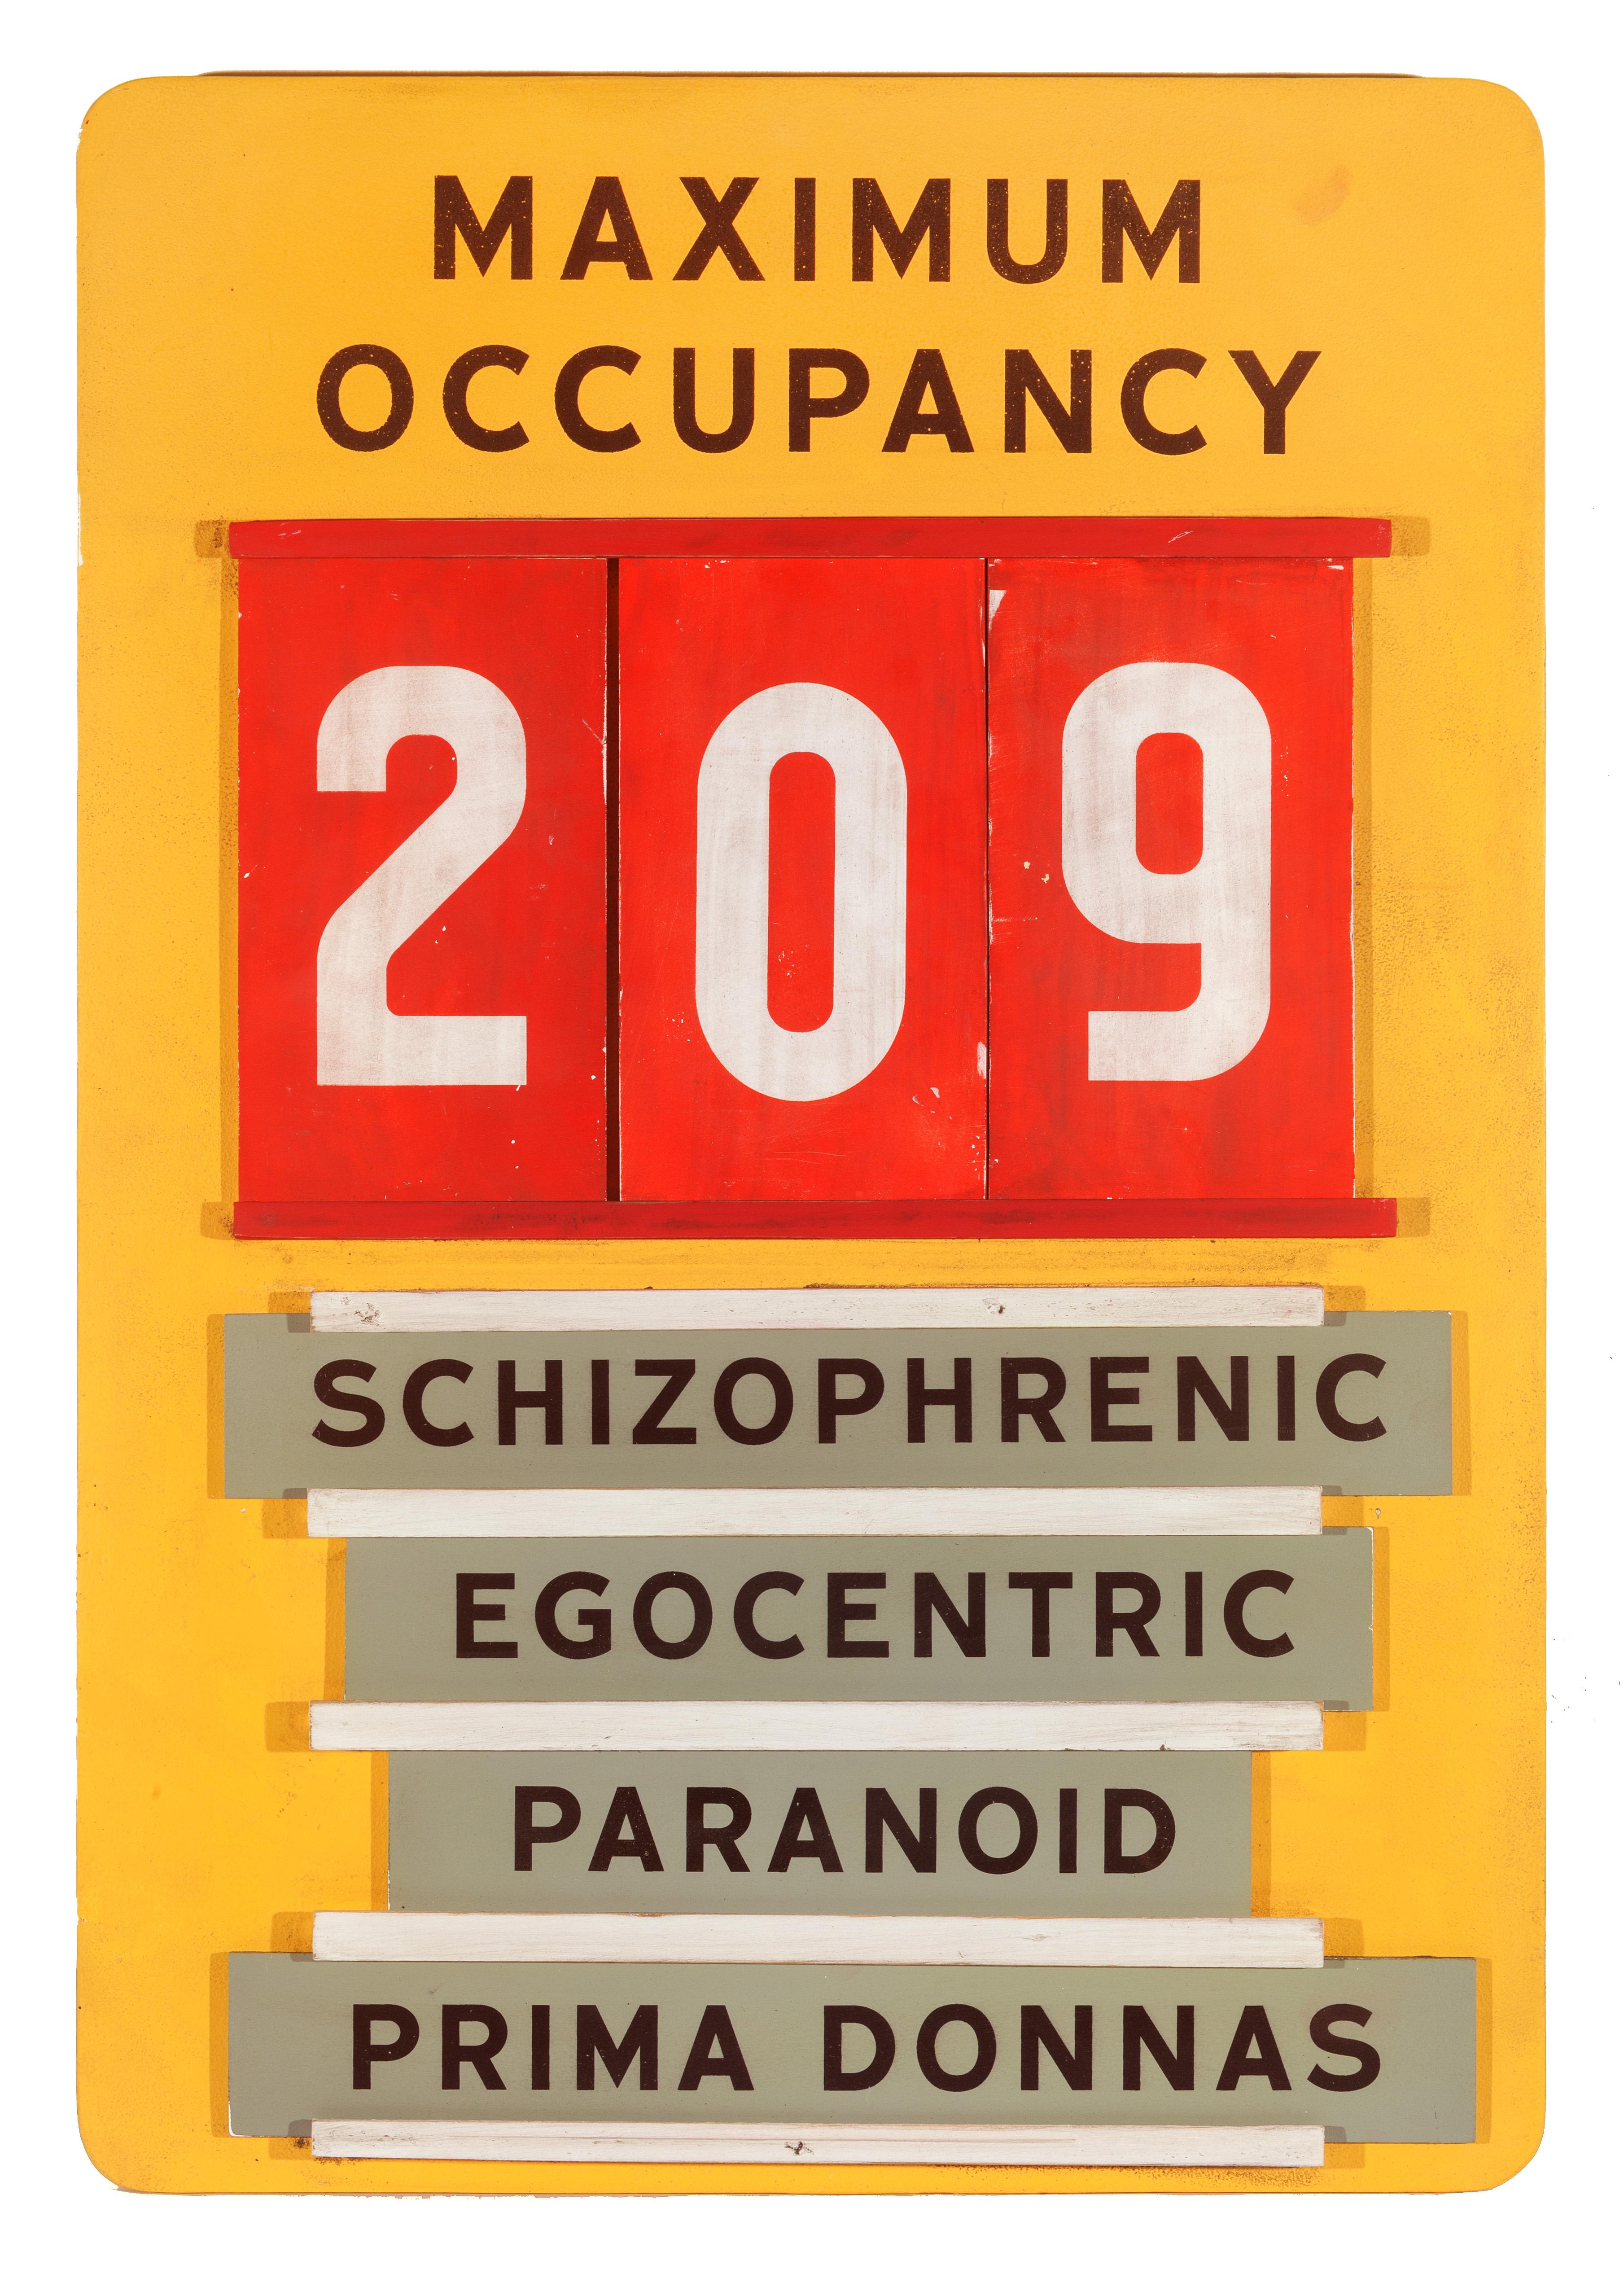 Maximum Occupancy (workplace safety sign)